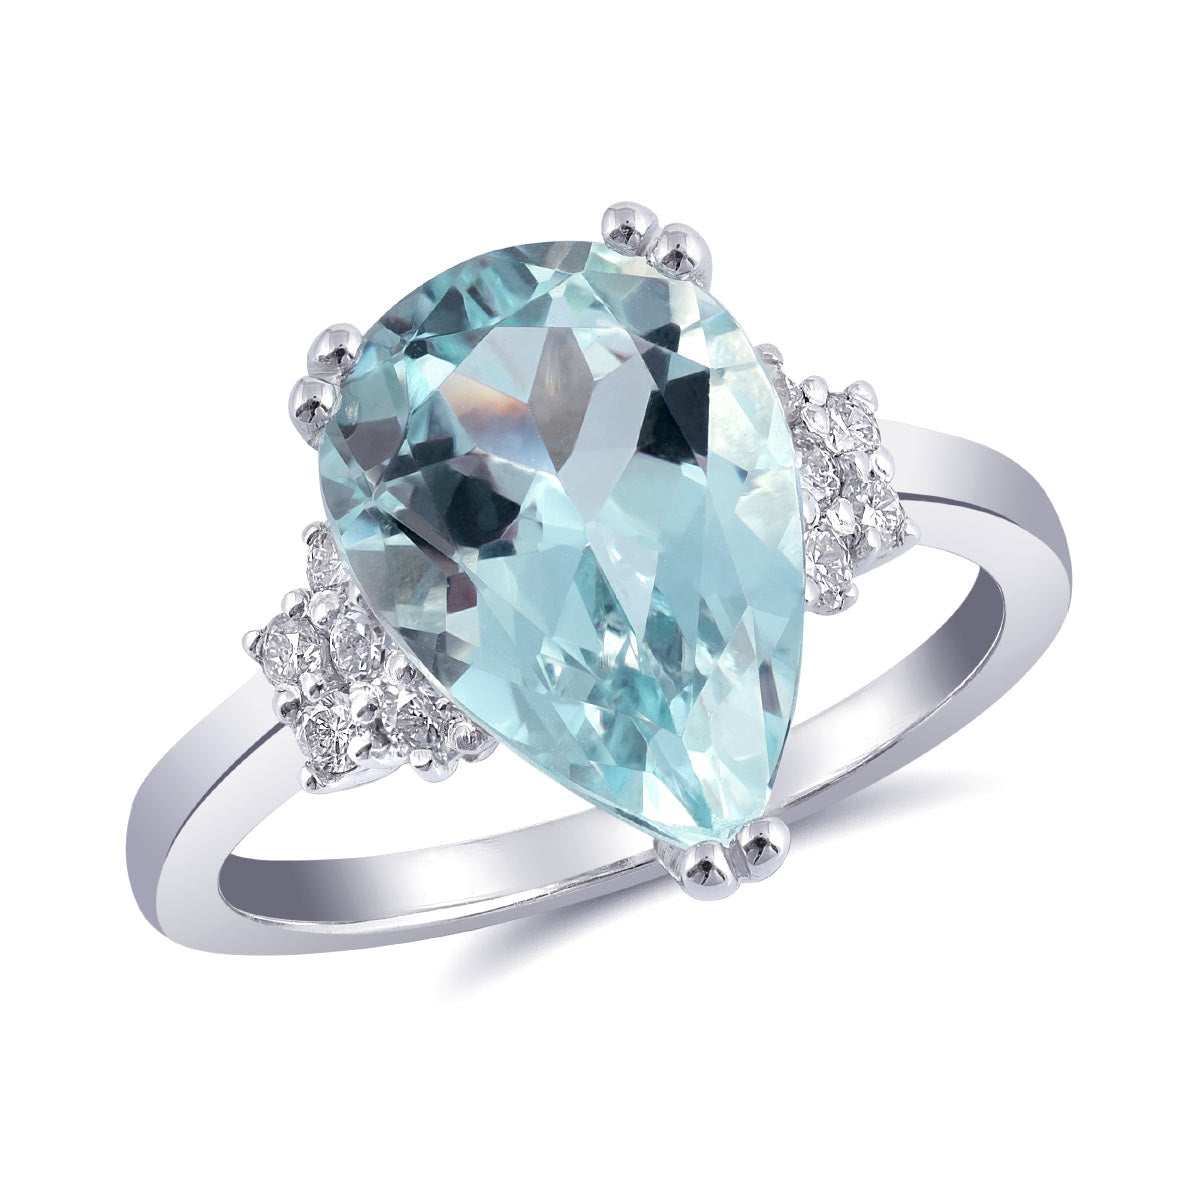 14K White Gold 3.67ct TGW Light Blue Aquamarine and Diamonds One of a Kind Ring